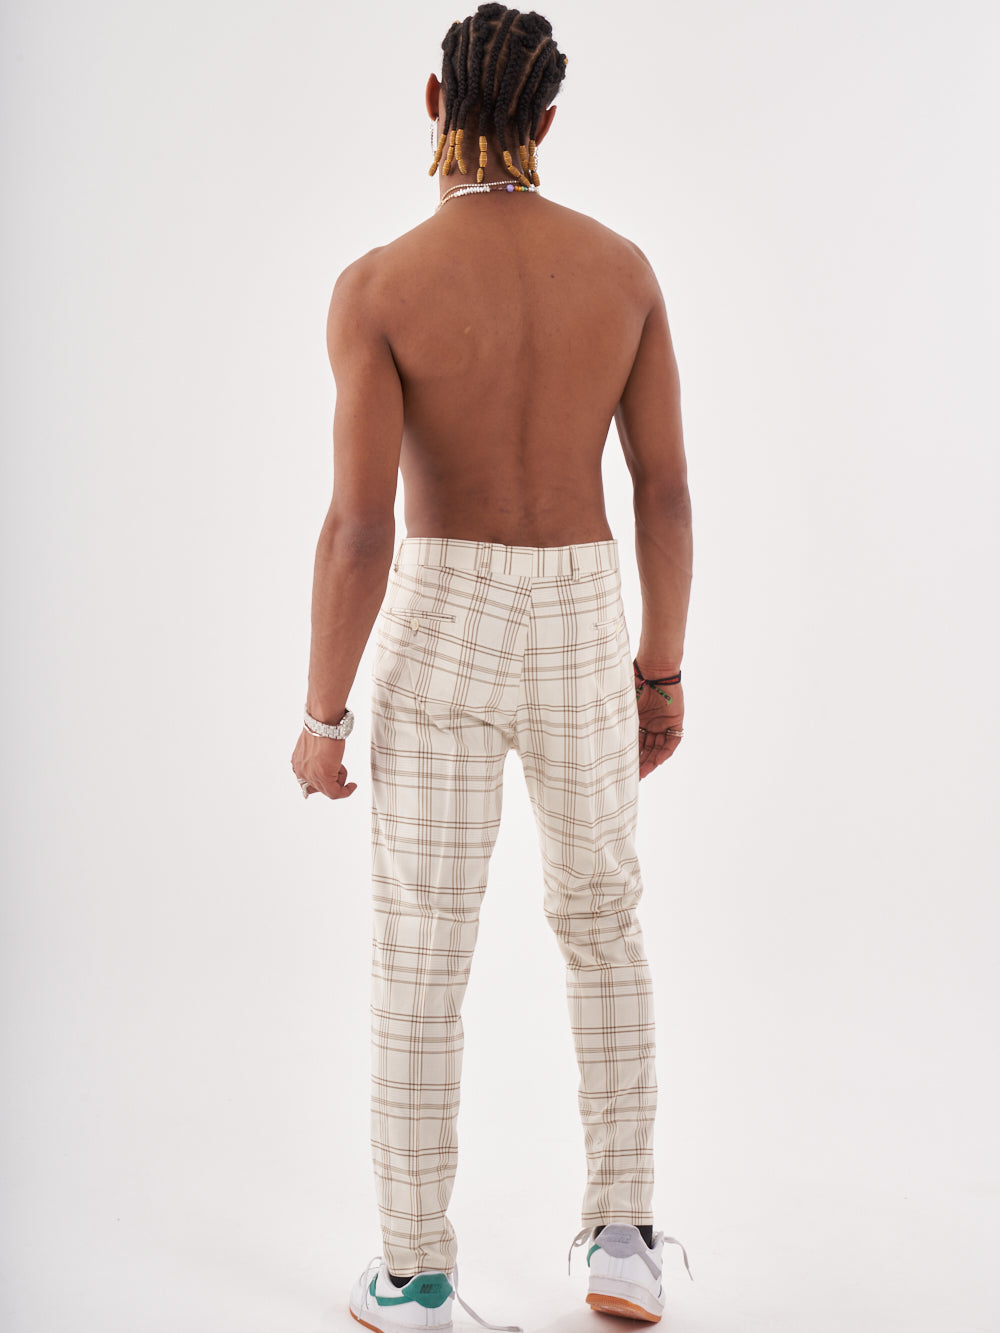 The back view of a man wearing Fullmoon Pants.